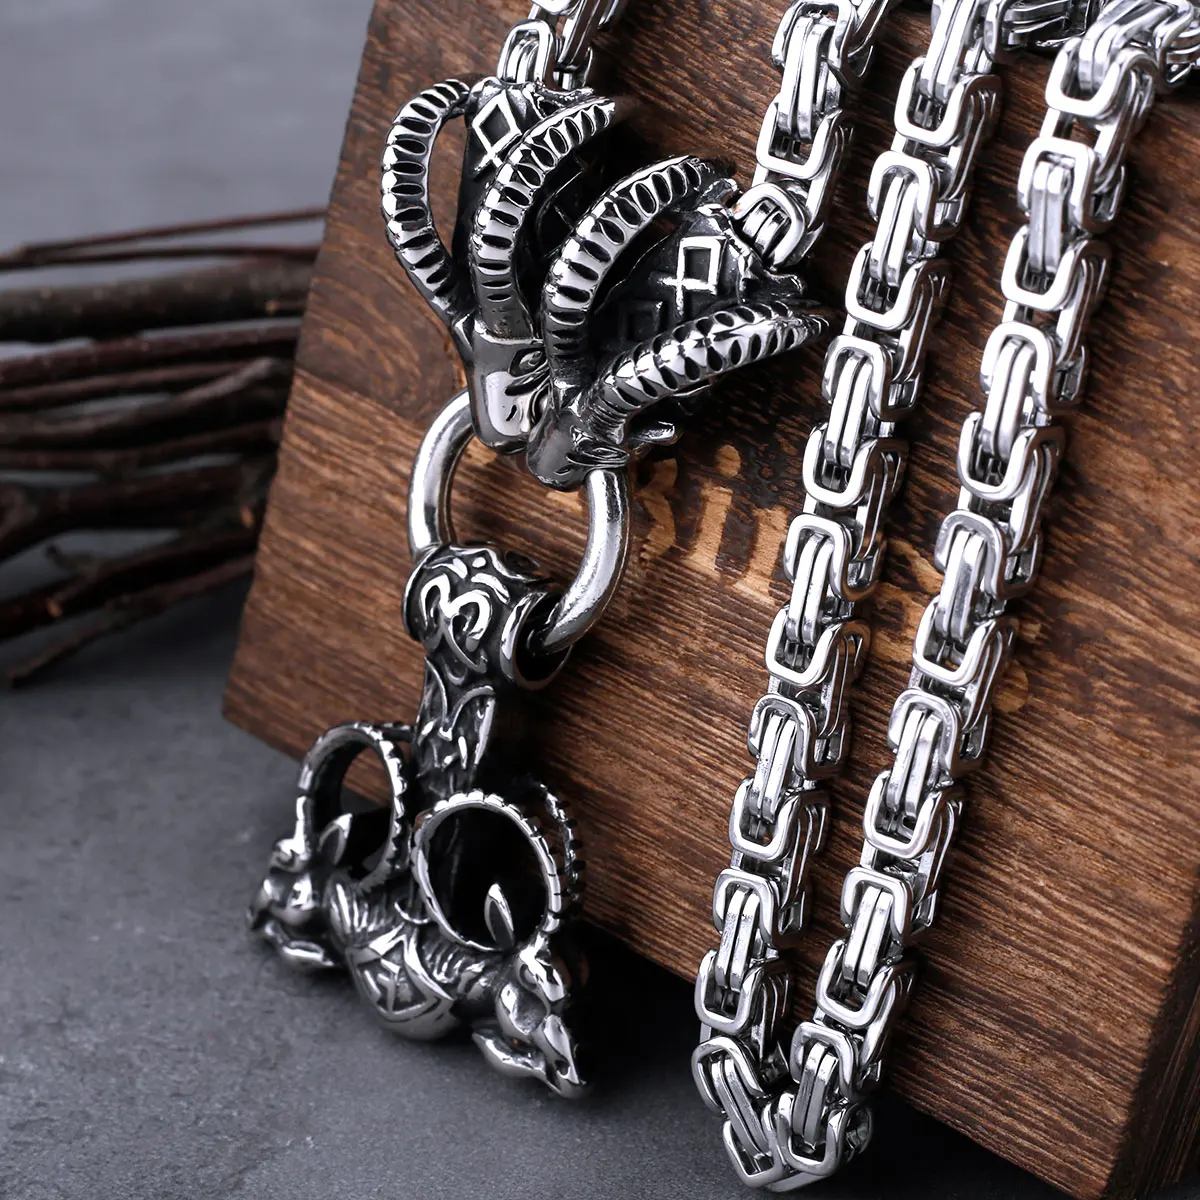 

Stainless Steel Viking Thor Hammer Anchor Pendant Ram Rune Necklace Men's Fashion Charm Chain Amulet Nordic Jewelry As A Gift